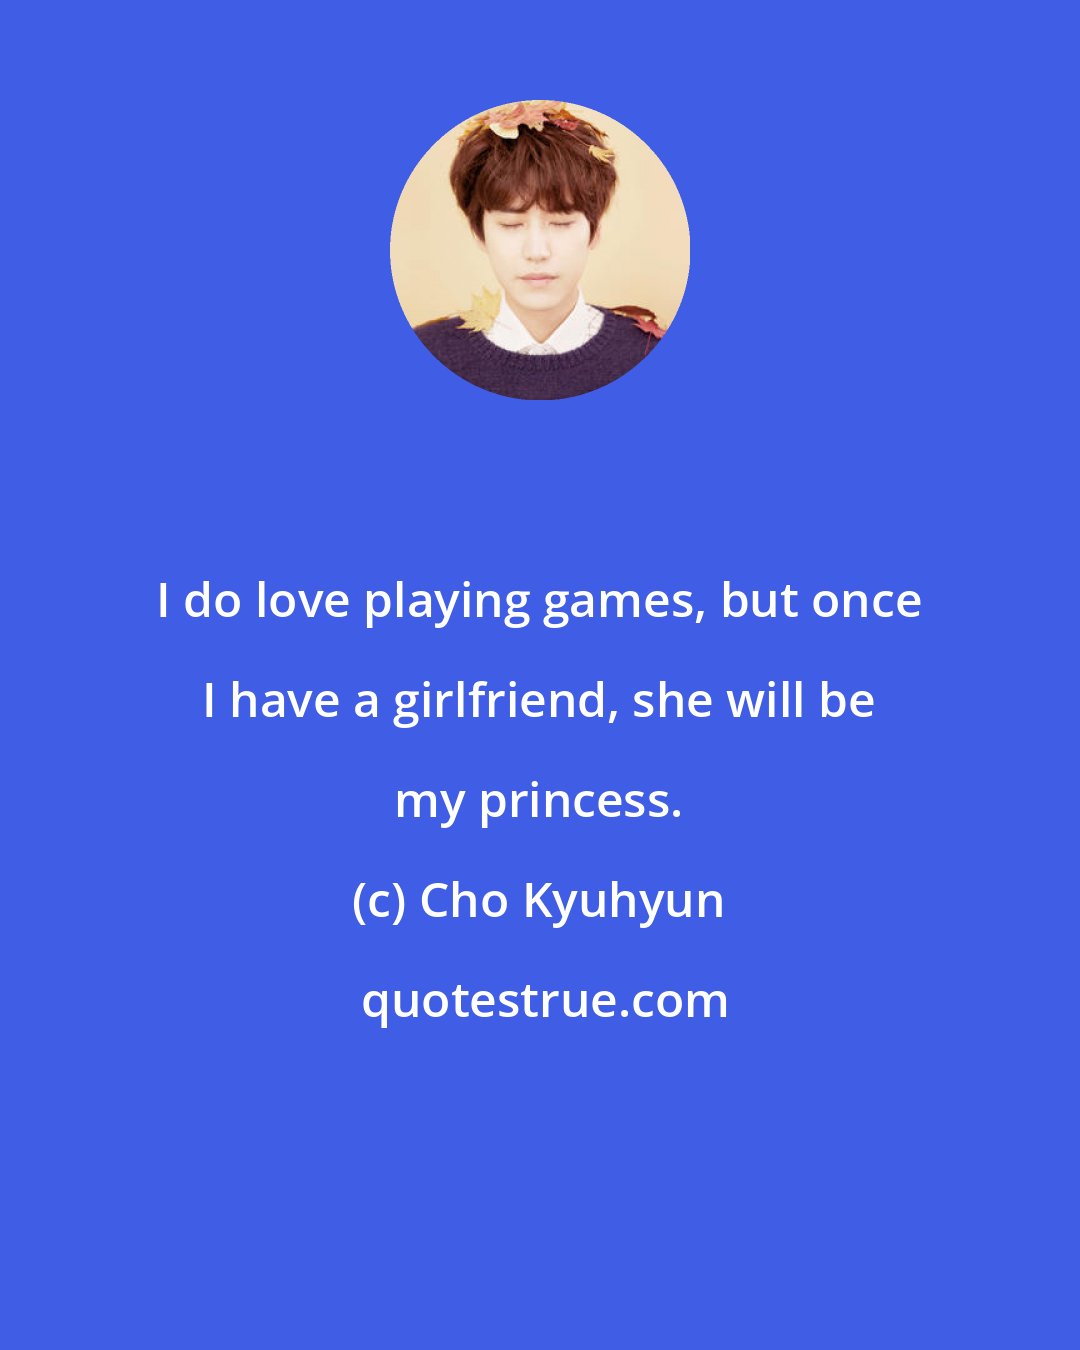 Cho Kyuhyun: I do love playing games, but once I have a girlfriend, she will be my princess.